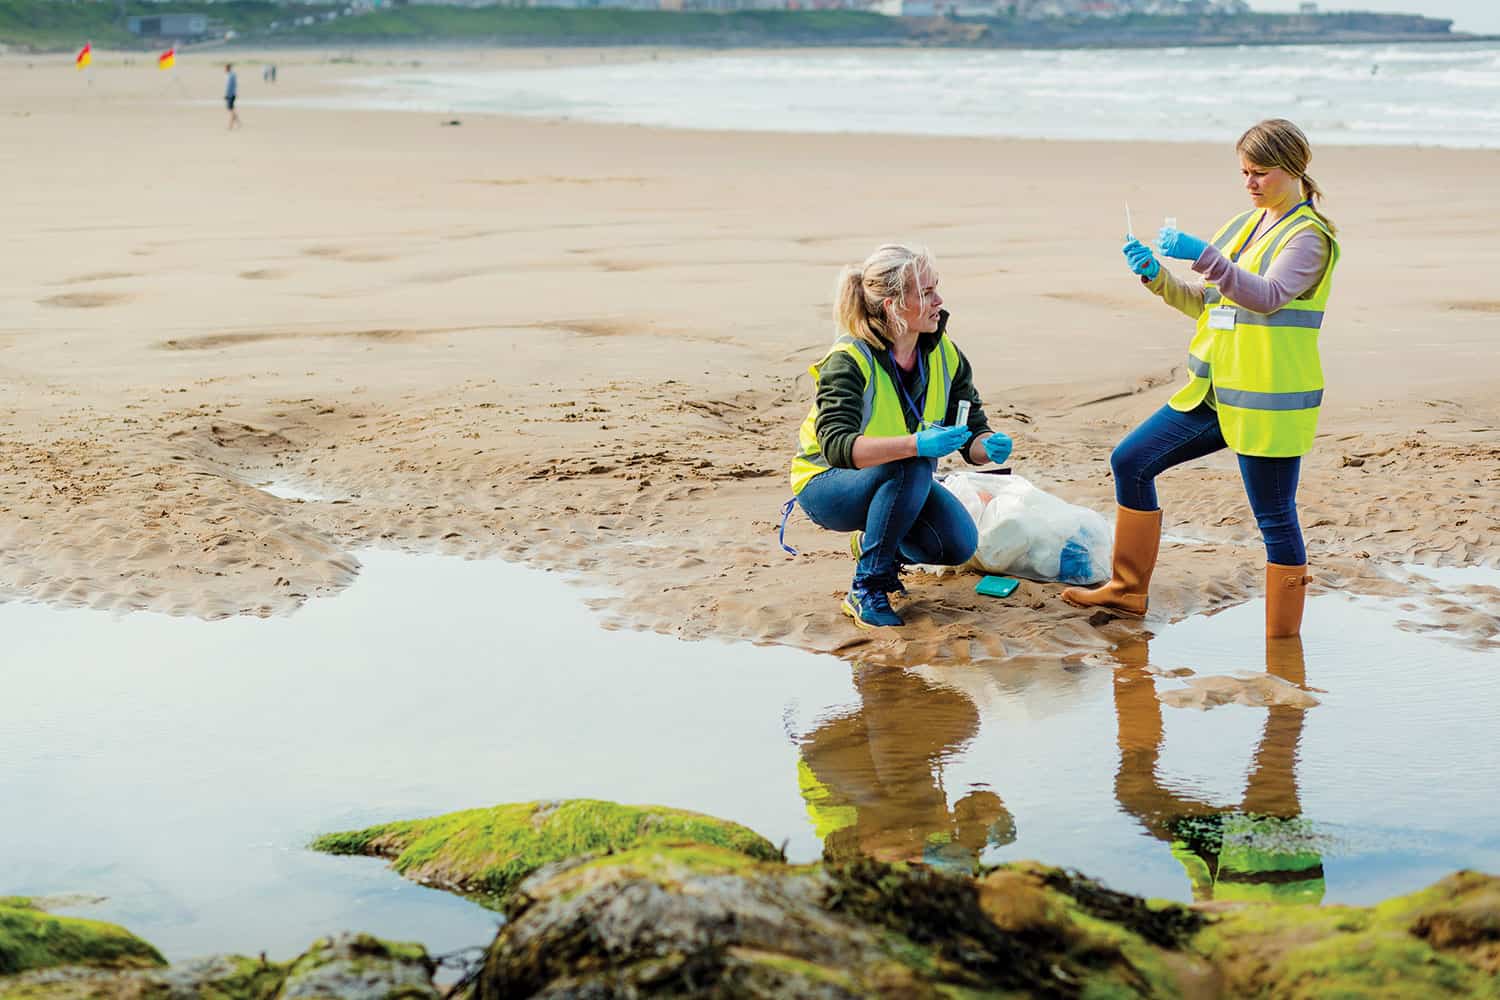 Pic: photo of two women in high-vis jackets and wellies sampling water in pool on beach with sea behind them.